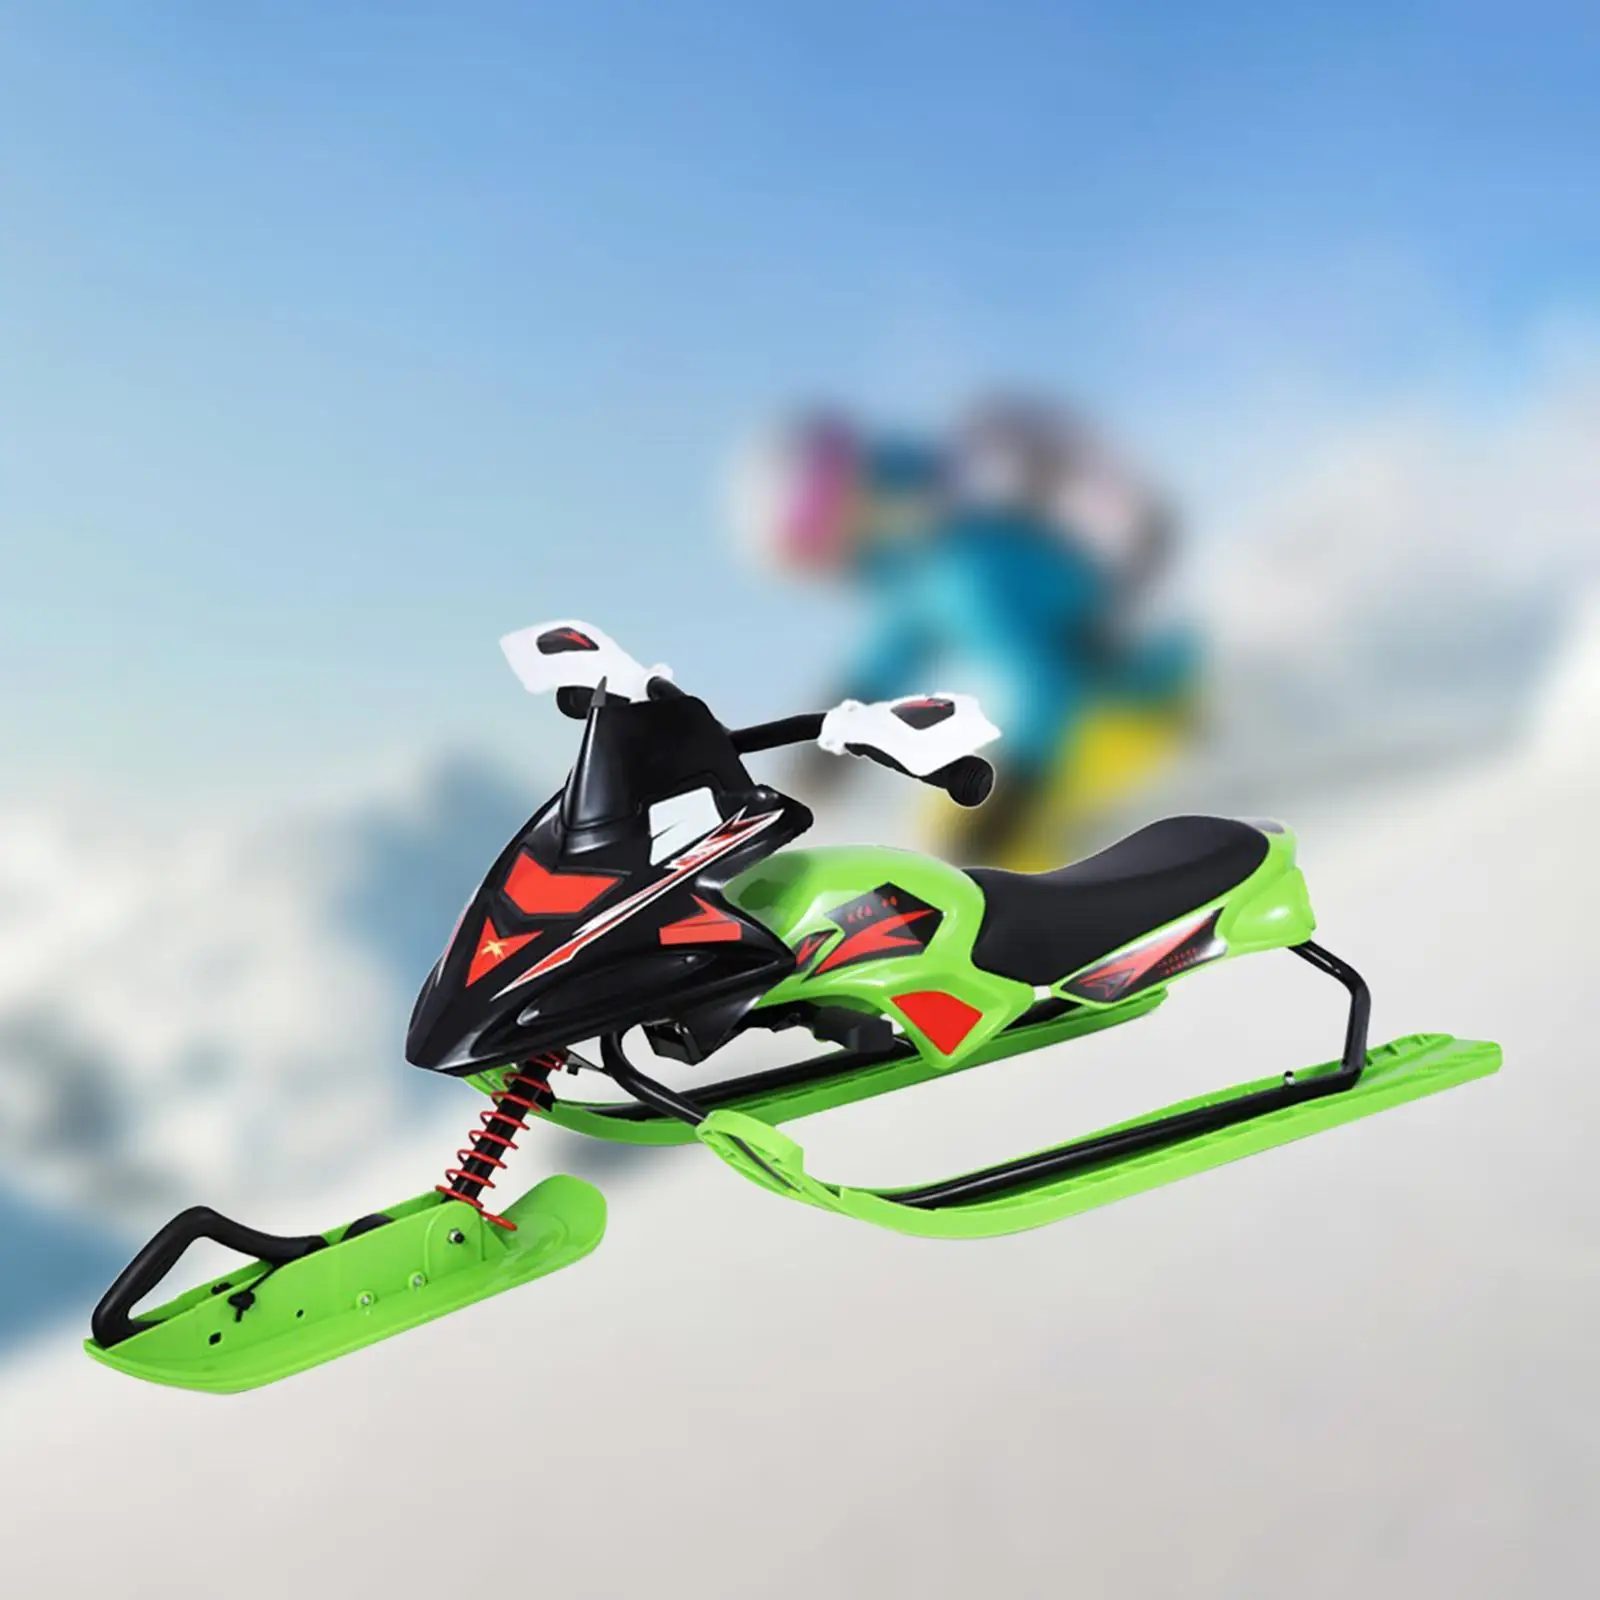 Snow Racer Snow Sled with Steering Wheel Brakes for Downhill and Uphill Ski Sled Slider Board for Adults Teen Kids